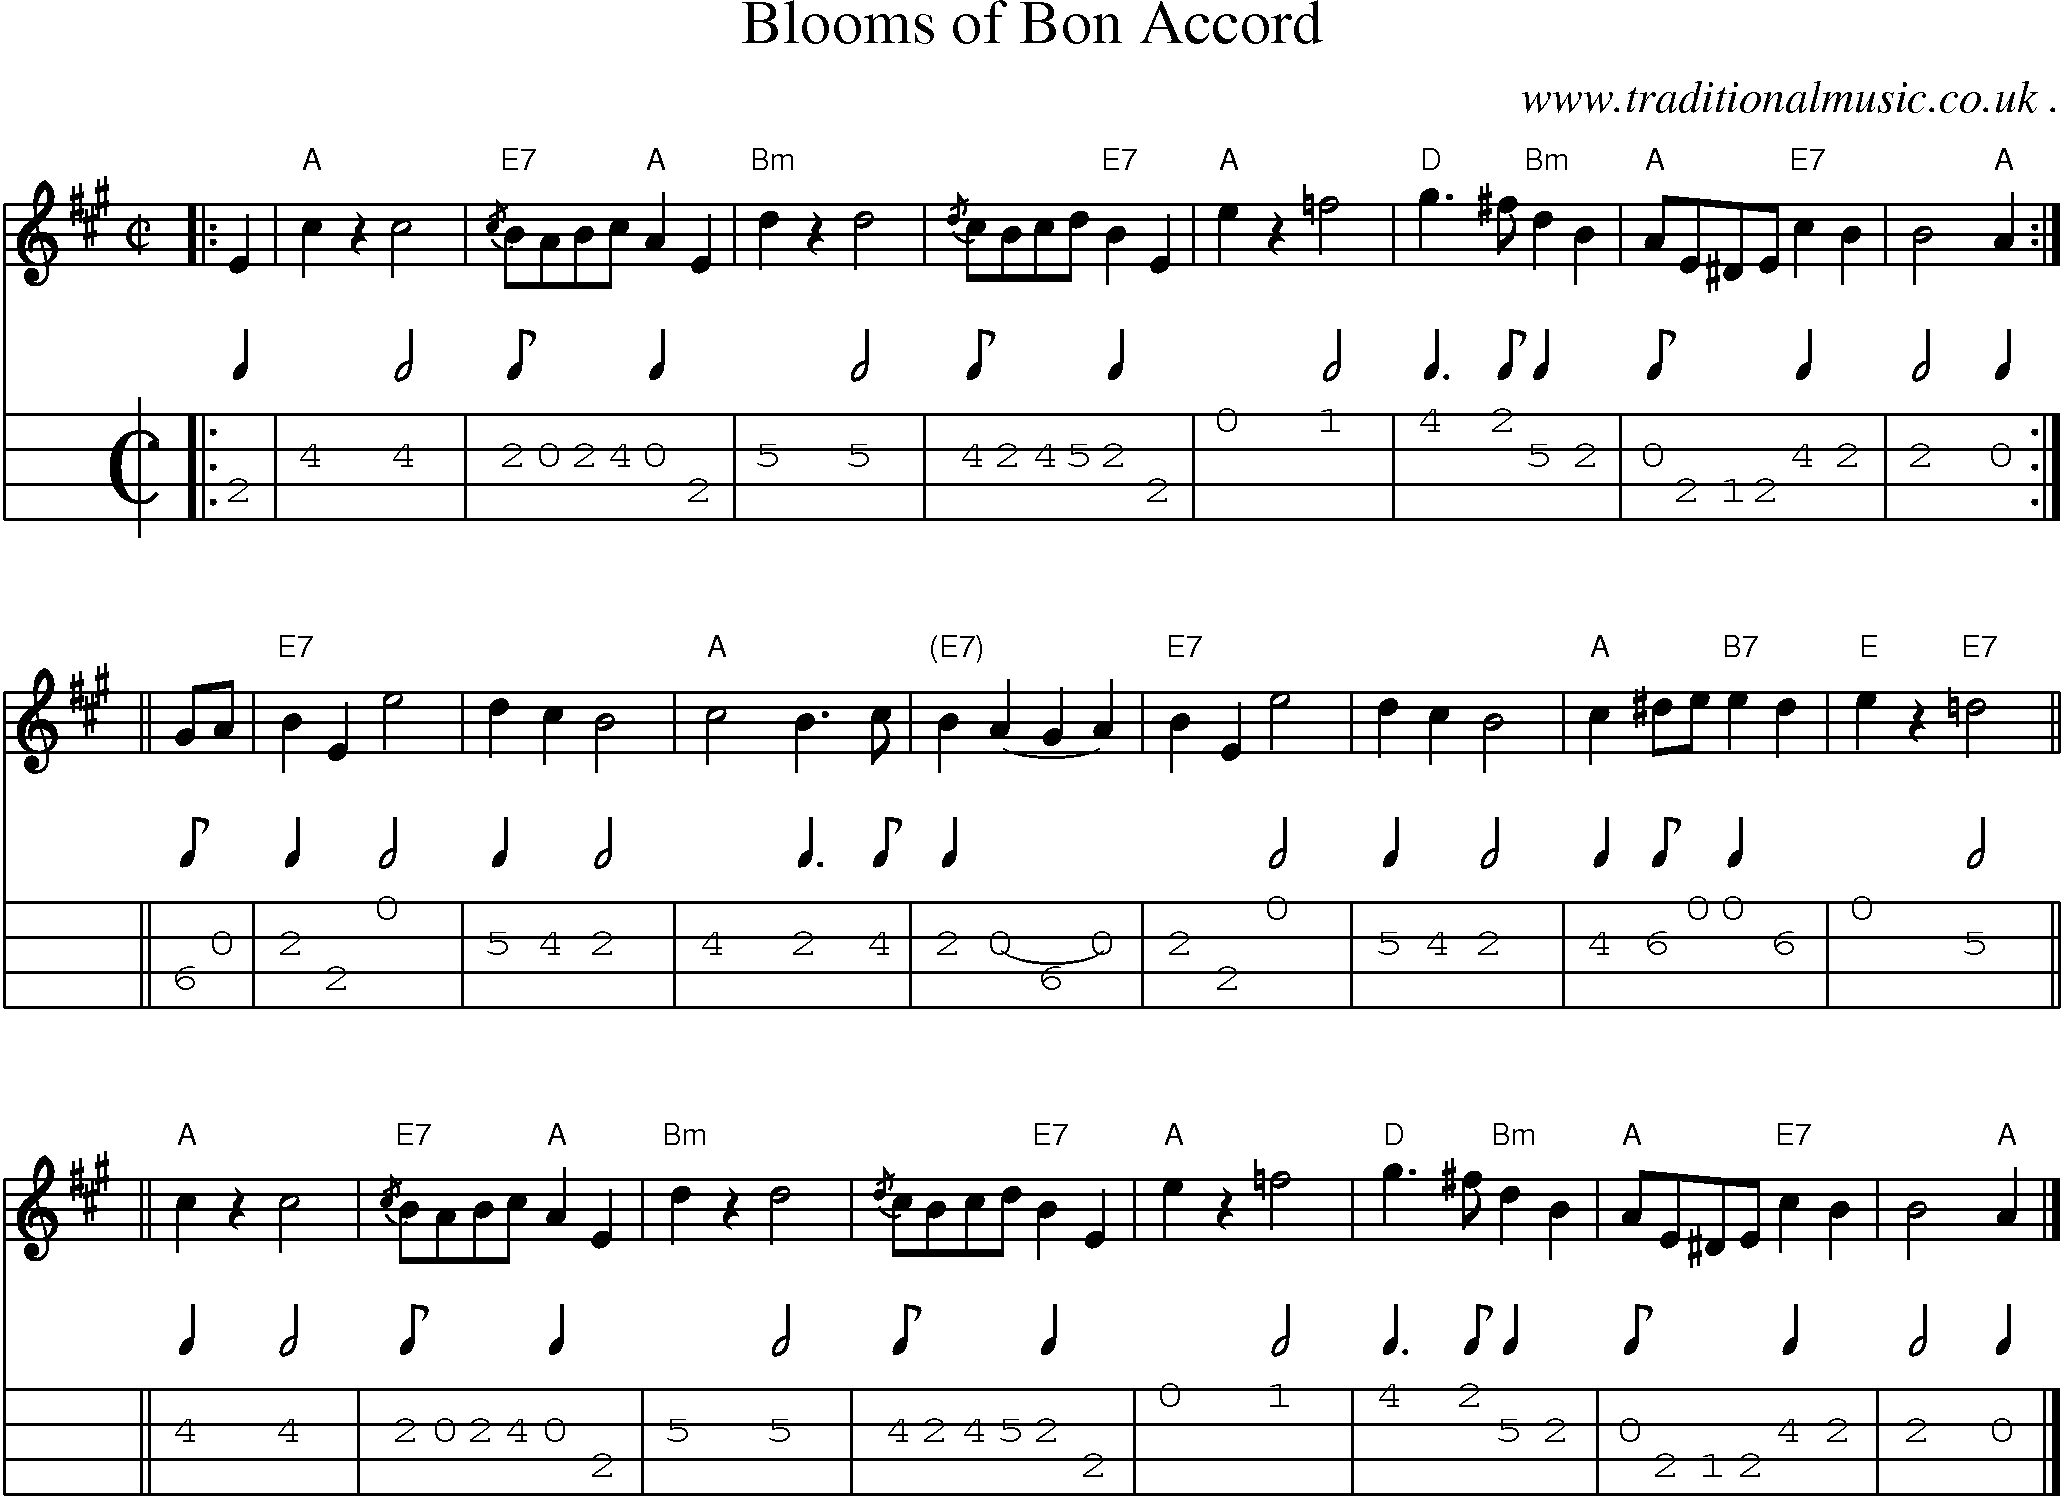 Sheet-music  score, Chords and Mandolin Tabs for Blooms Of Bon Accord